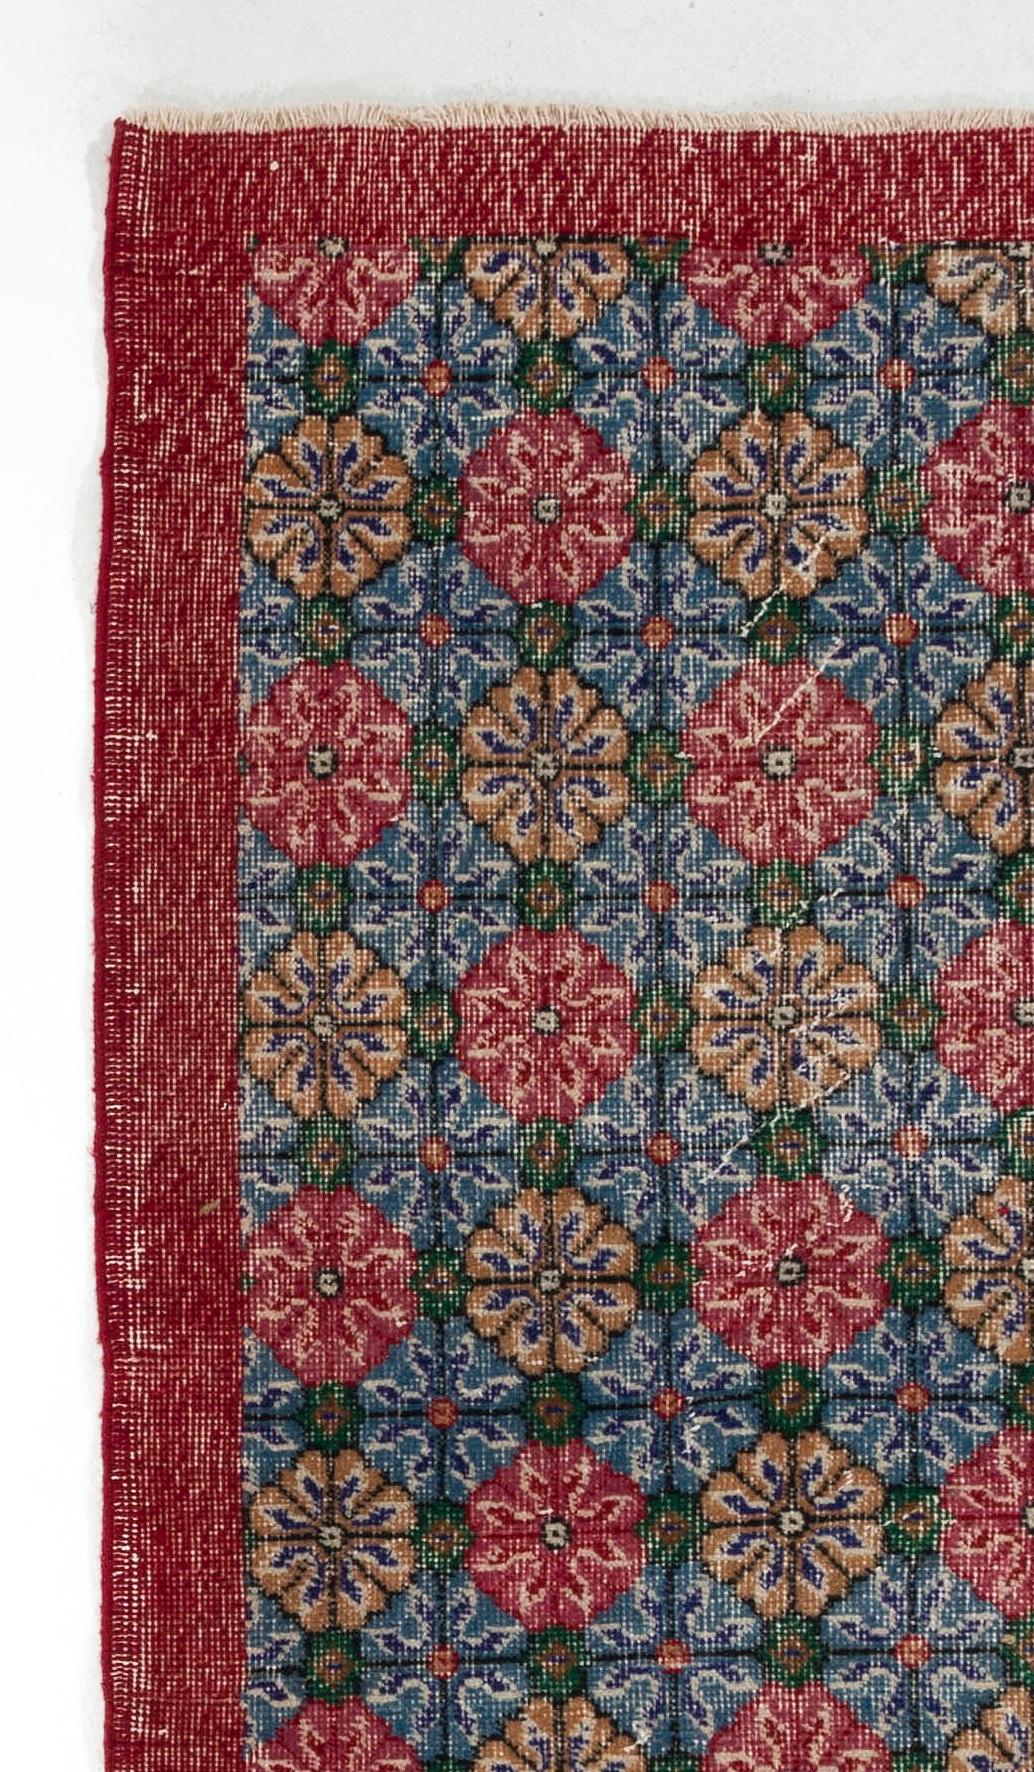 This vintage hand knotted Turkish rug features an all-over design of kaleidoscopic floral heads in red, gold, blue and green in its field and a plain main border in red.

The rug has low wool pile on cotton foundation, is sturdy, in good condition